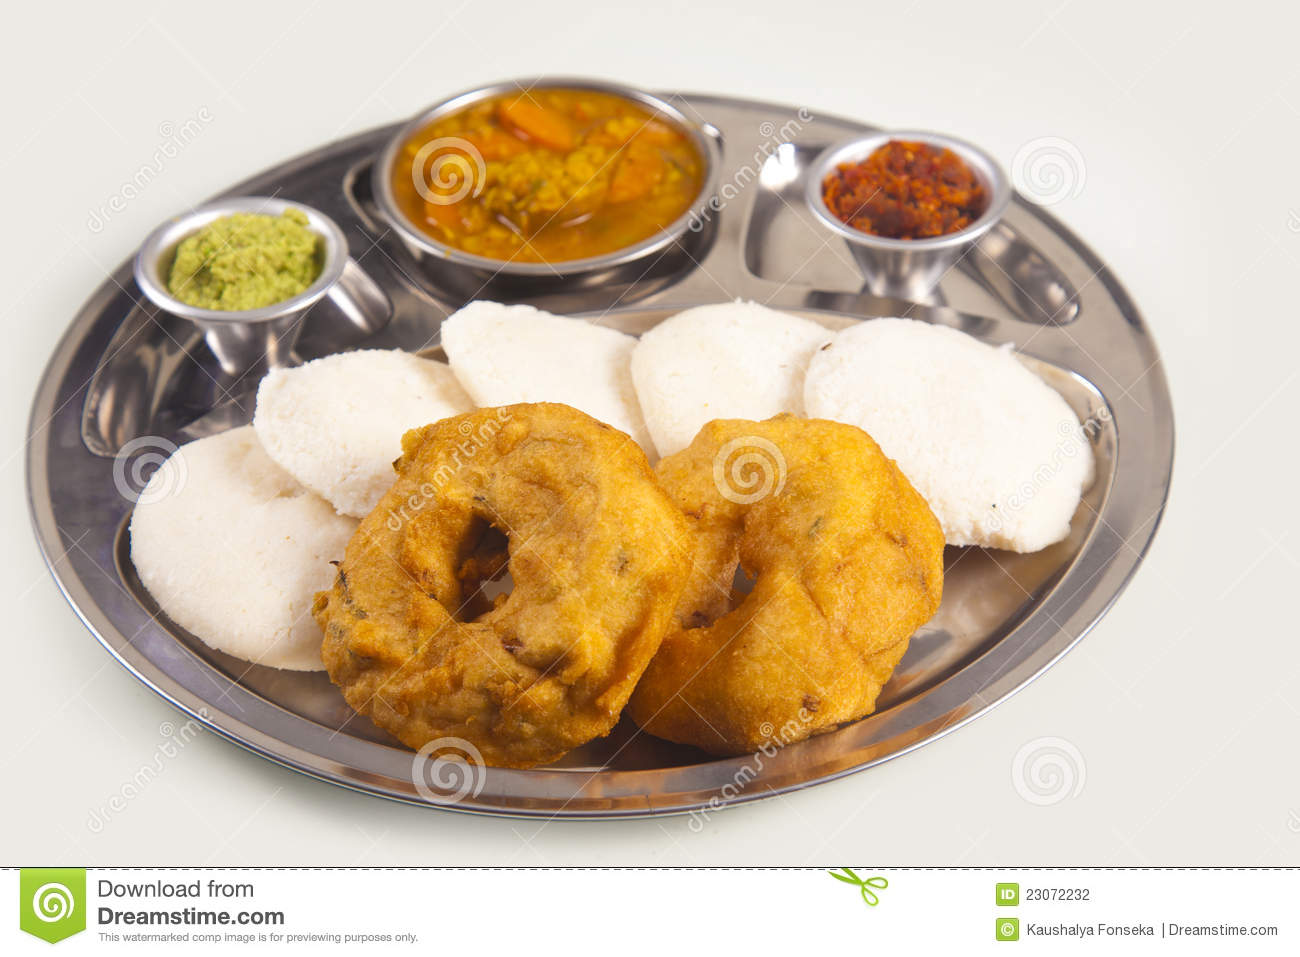 Indian Food Dish   Vade And Idly   Stock Photography   Image  23072232